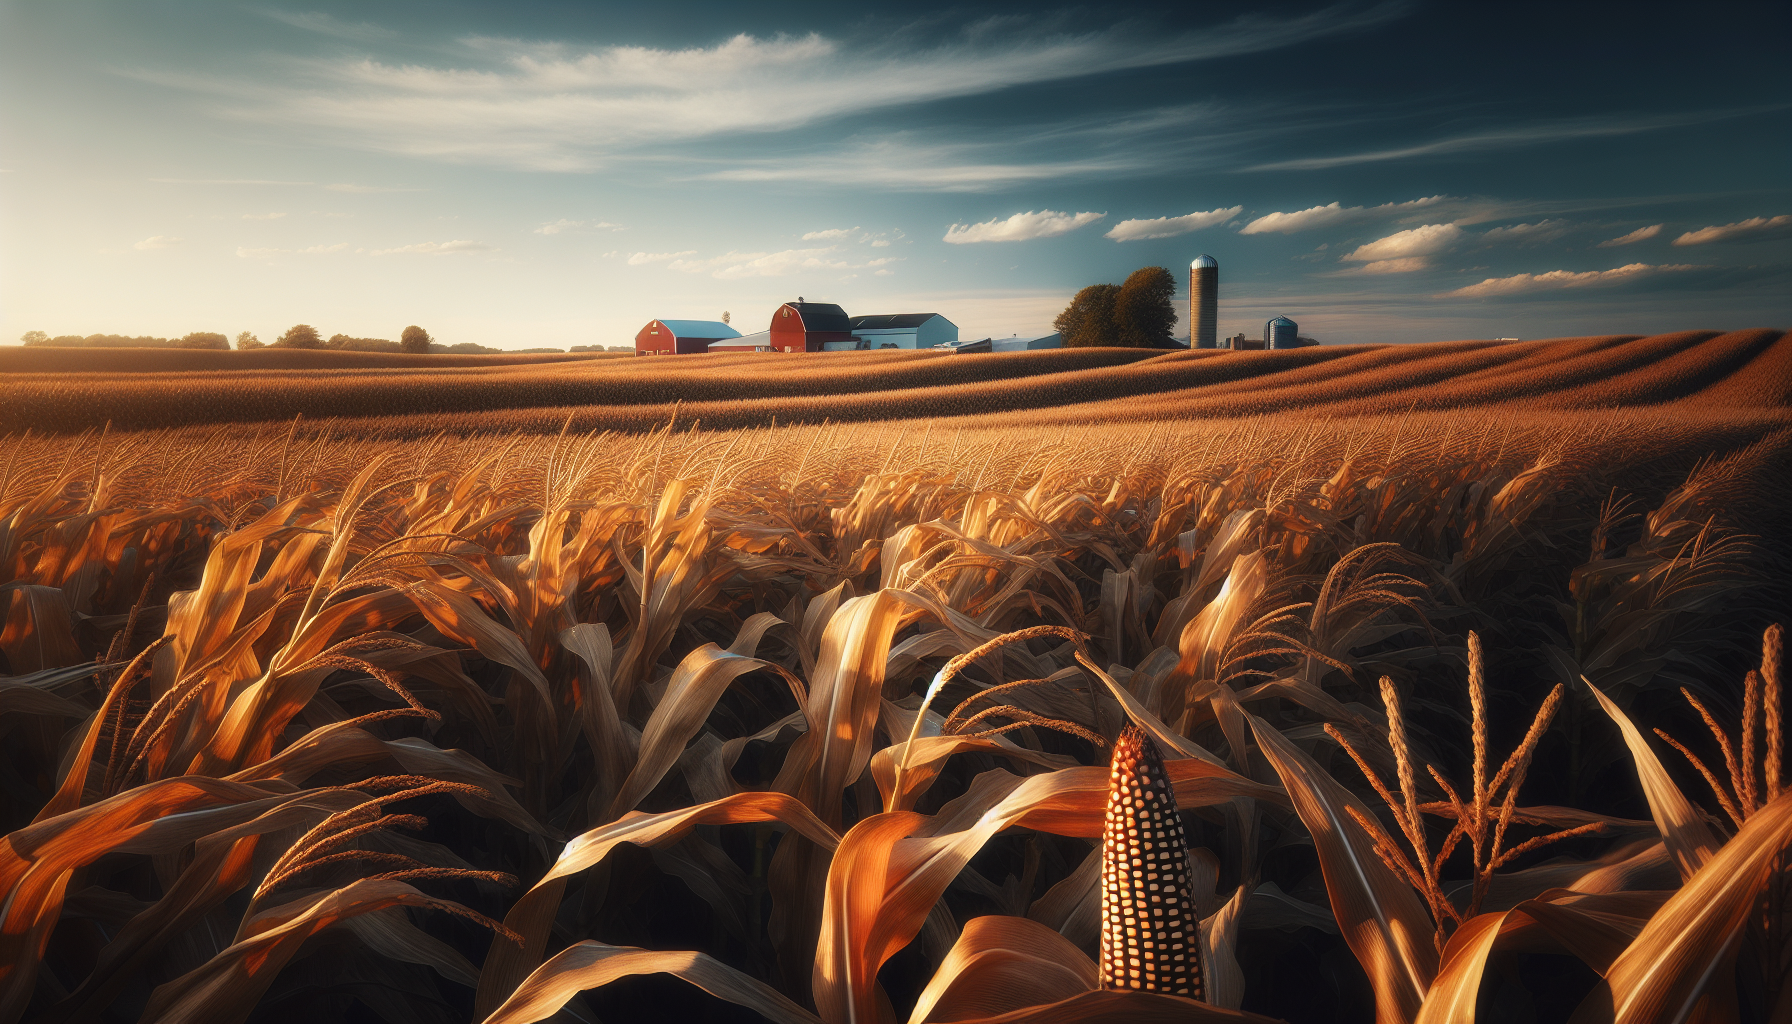 A field of corn, one of the feedstocks used in ethanol production